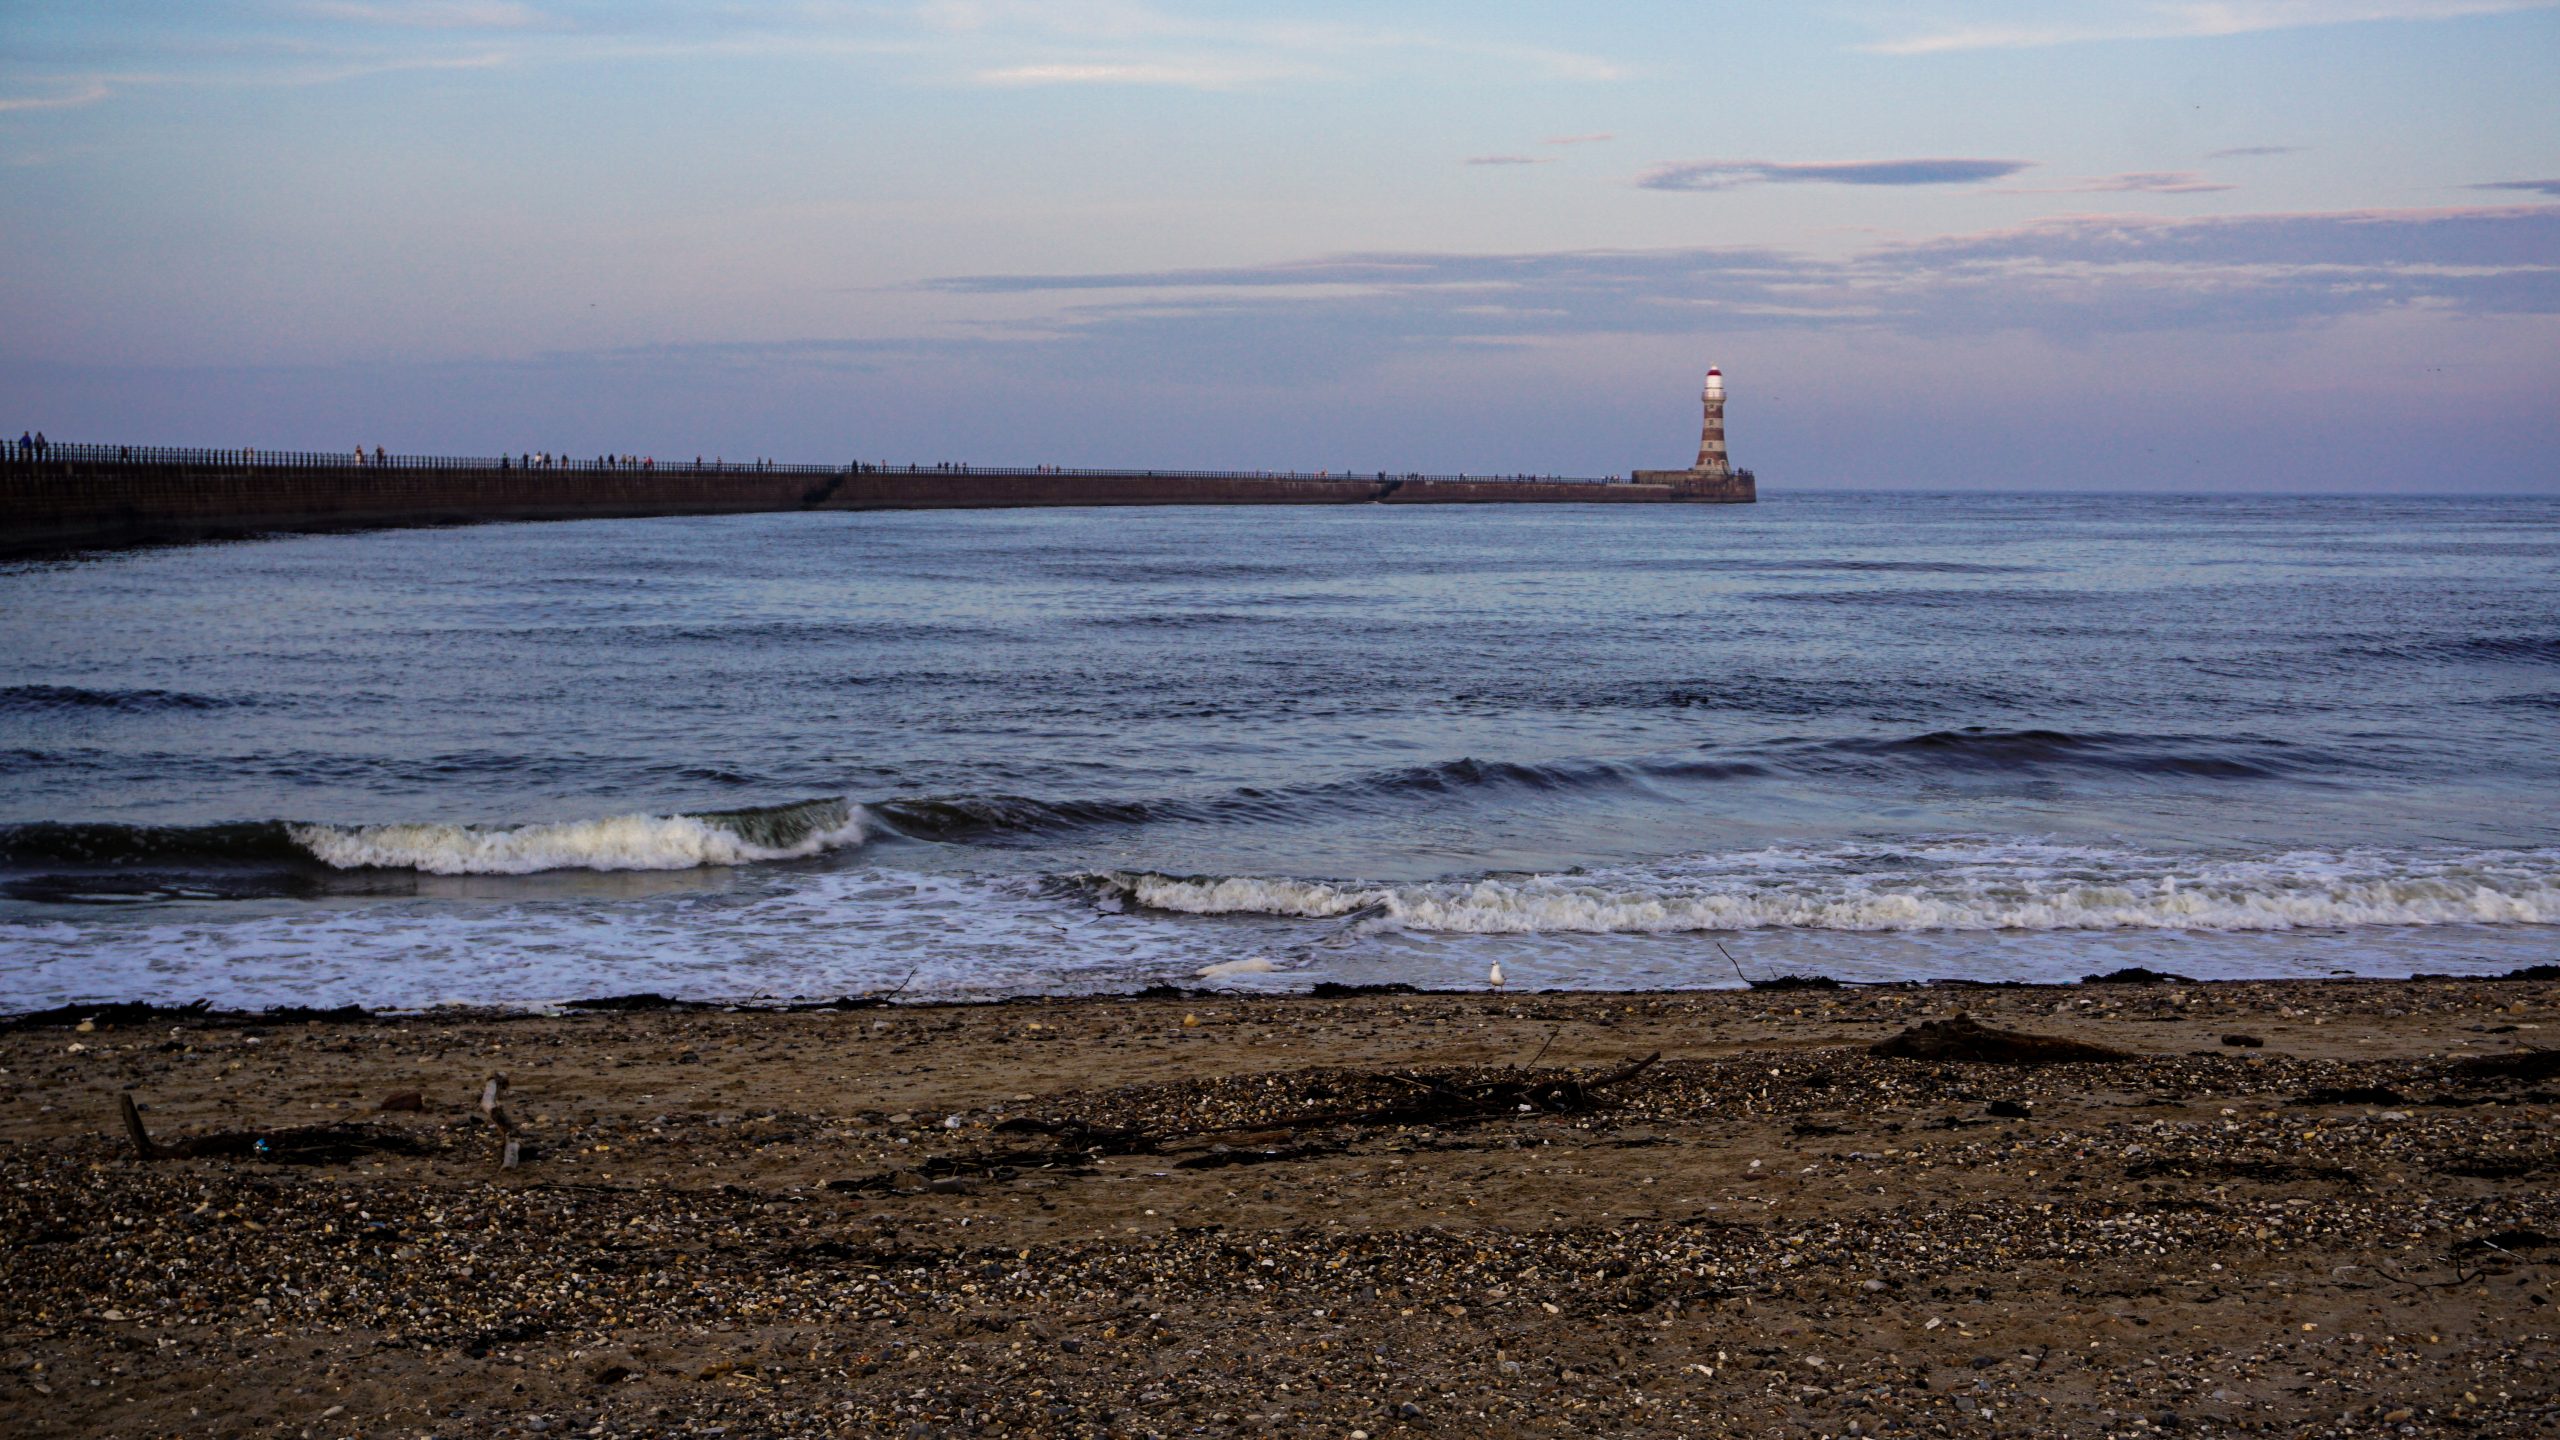 Roker Pier and Lighthouse